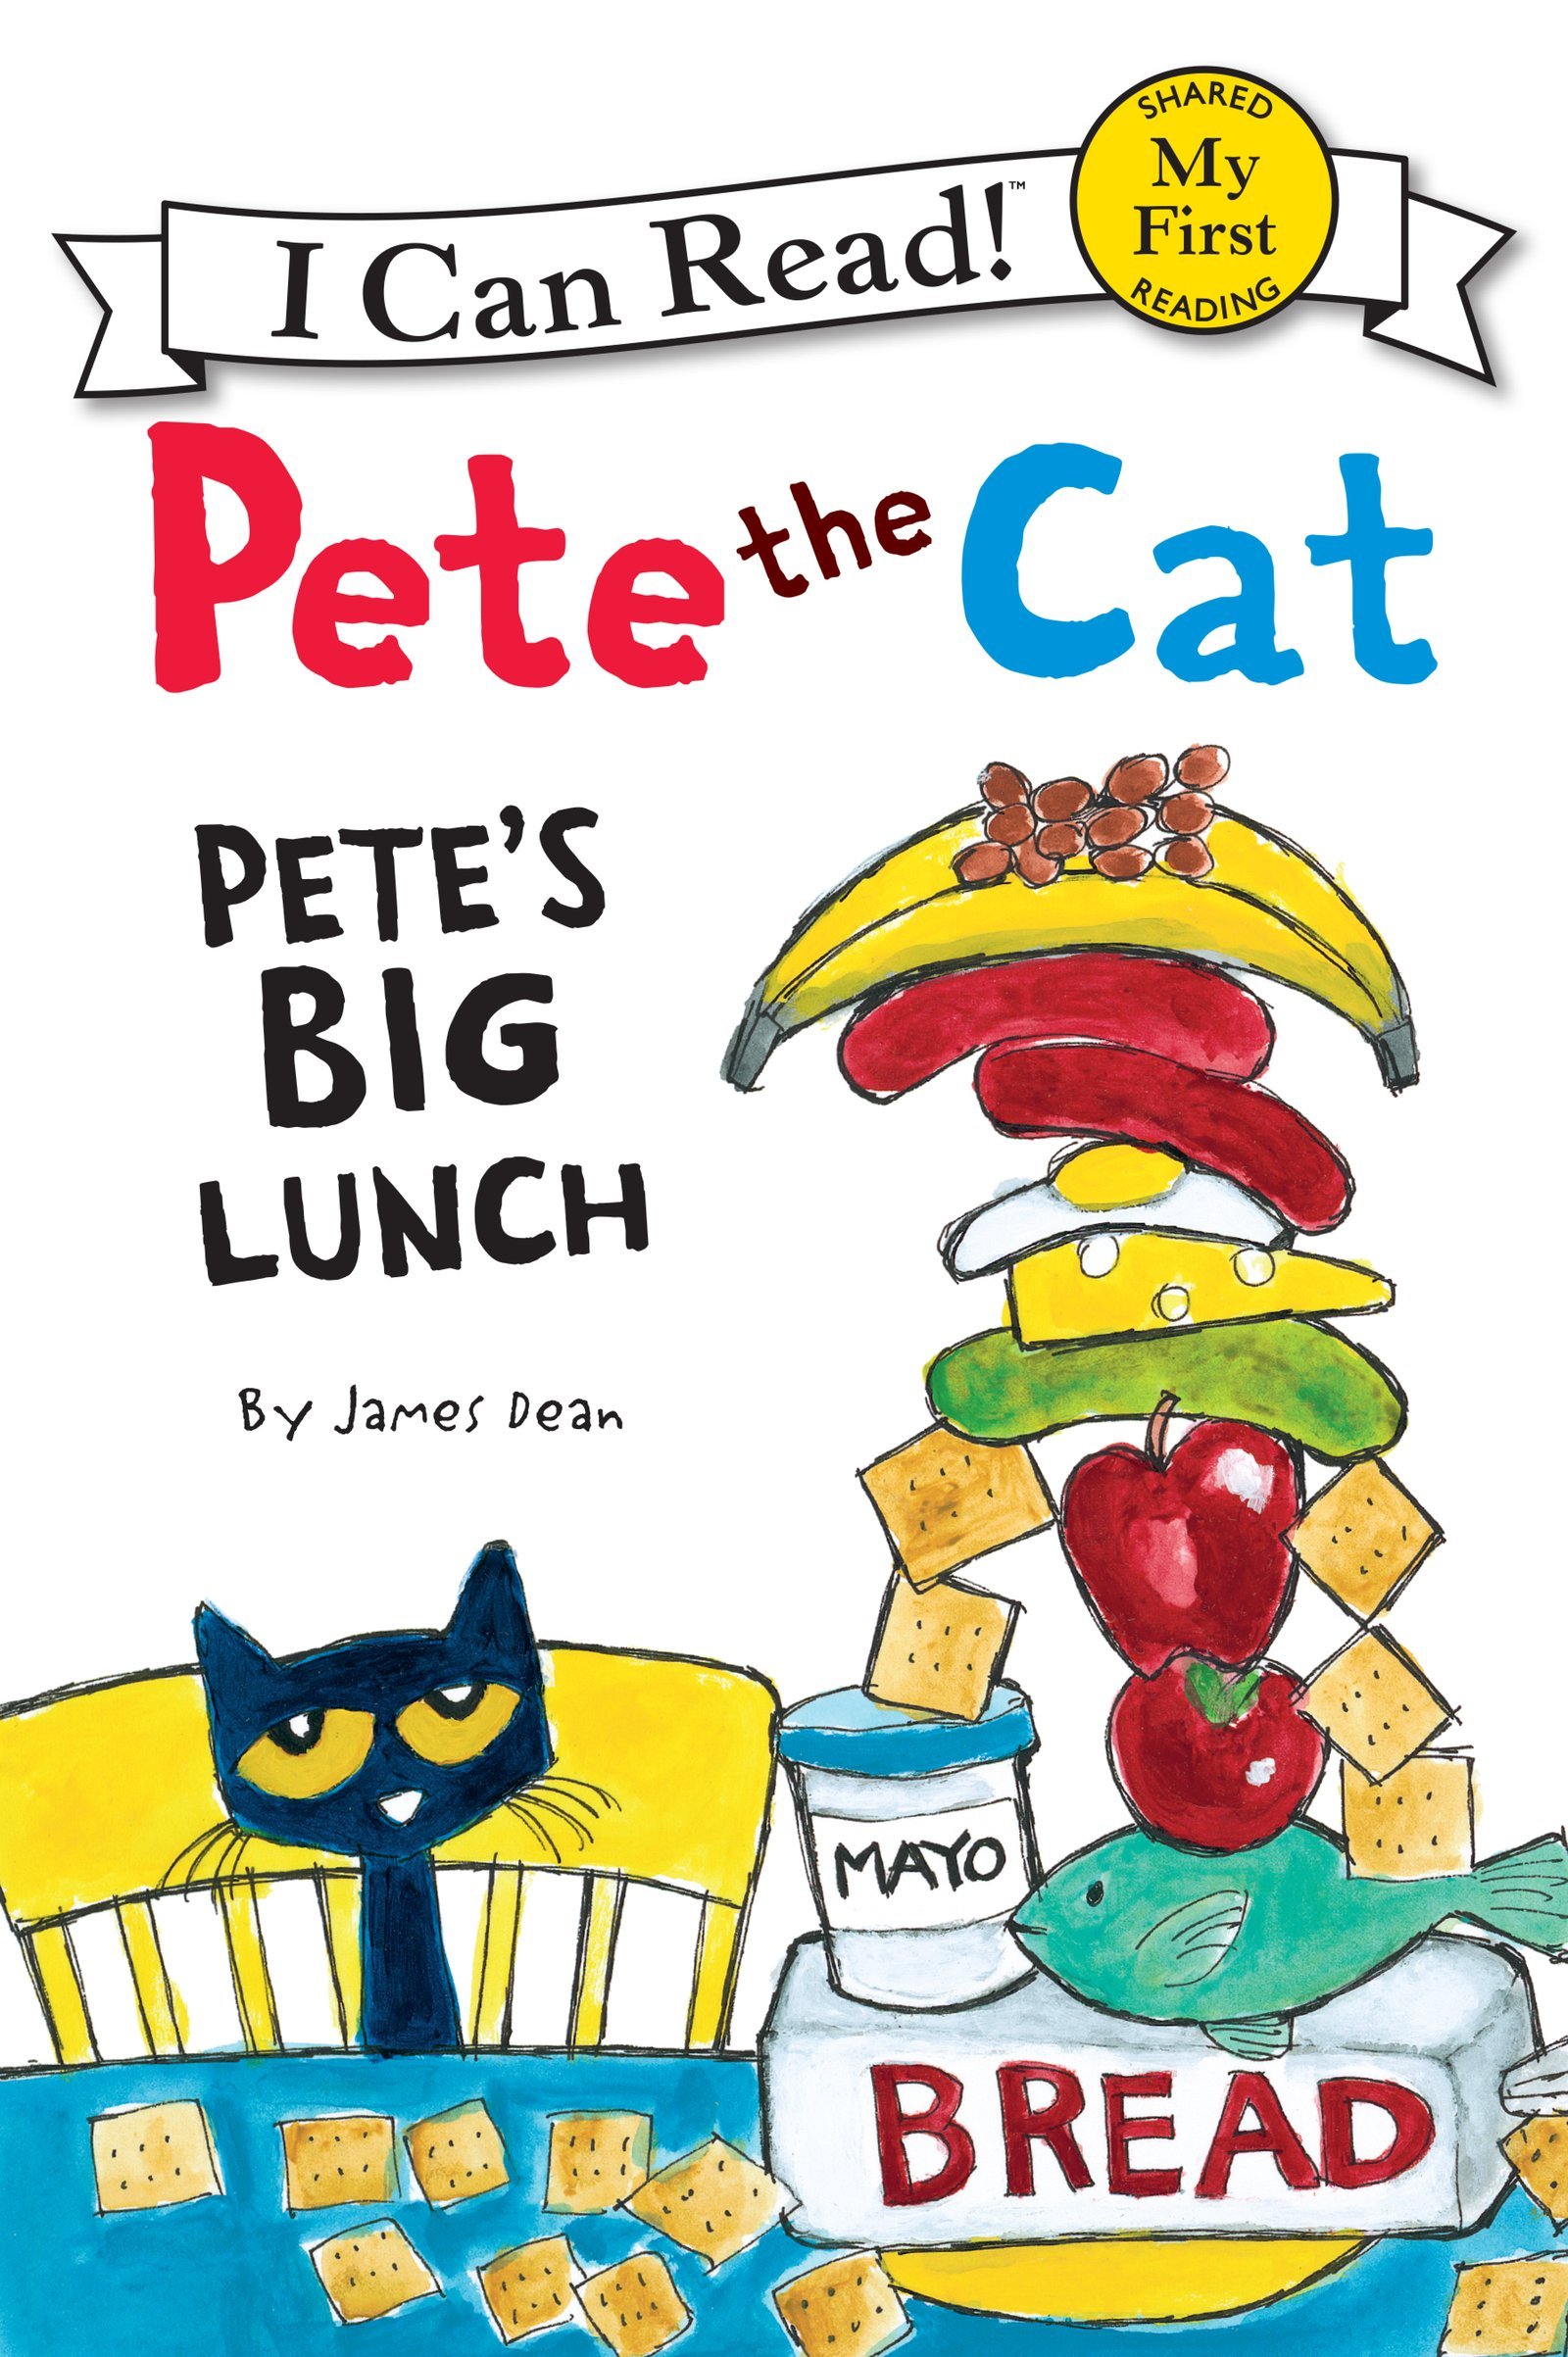 Pete the Cat: Pete’s Big Lunch